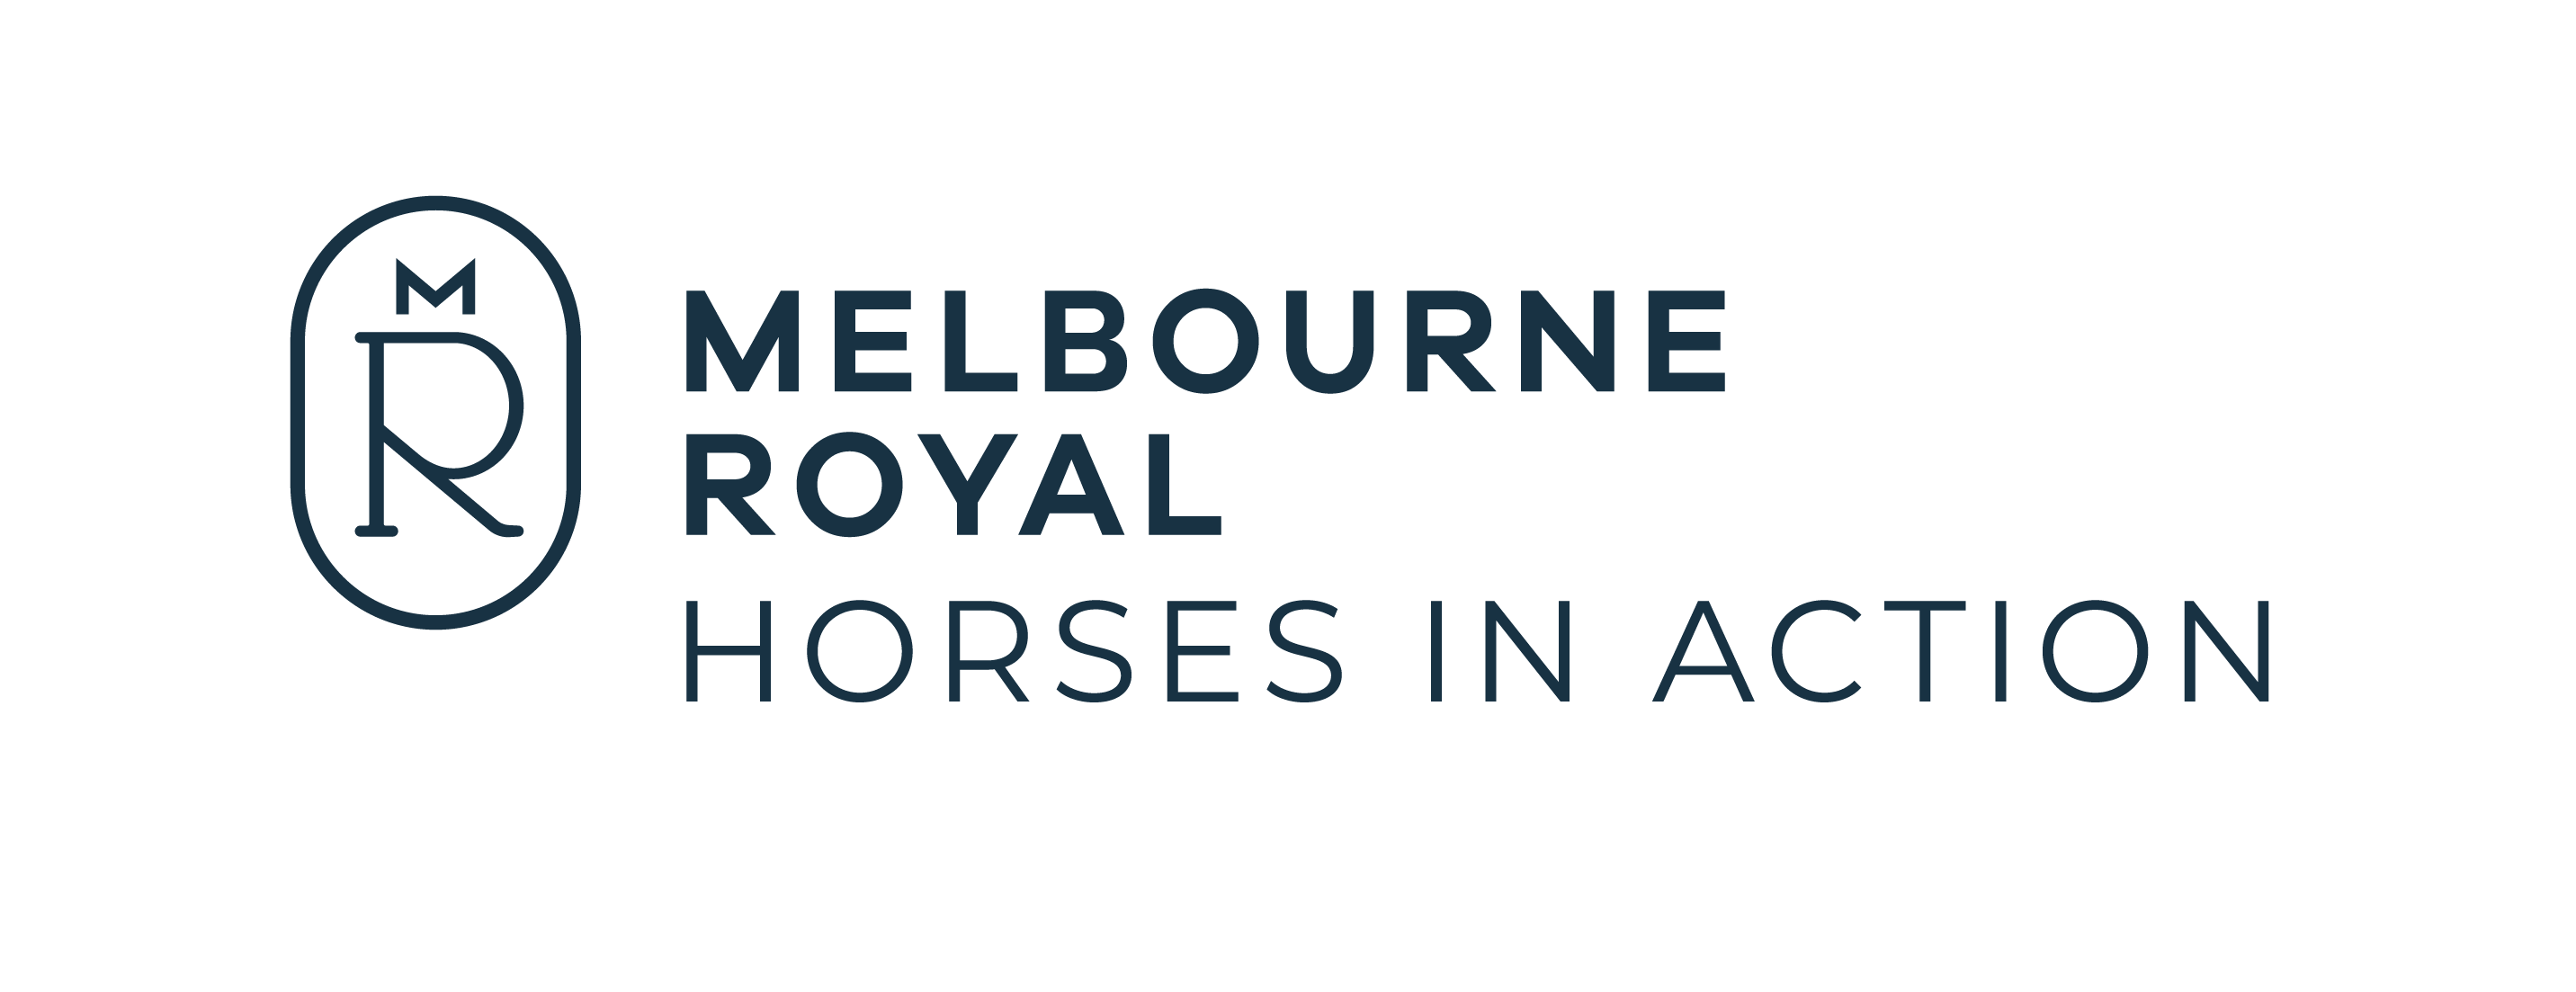 Melbourne Royal Horses in Action Competition